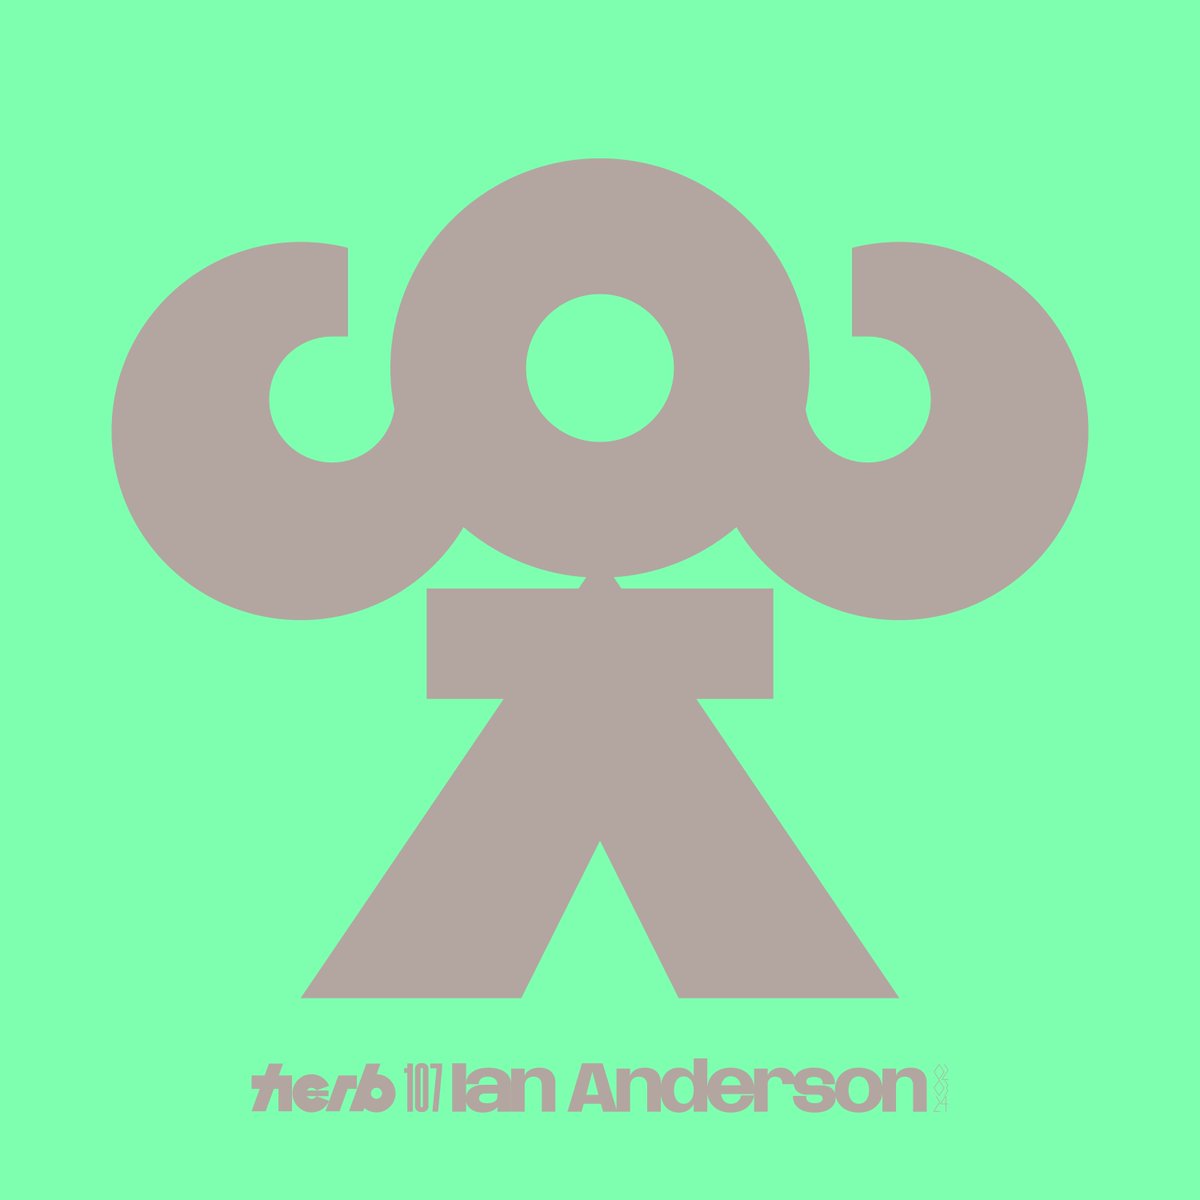 Herb Sundays 107: Ian Anderson (The Designers Republic) (@ianTDR / @disinfoTDR) The influential designer shares a 6 day, 2000+ song studio playlist. art by @Michaelcina. Link in bio to text/playlist.